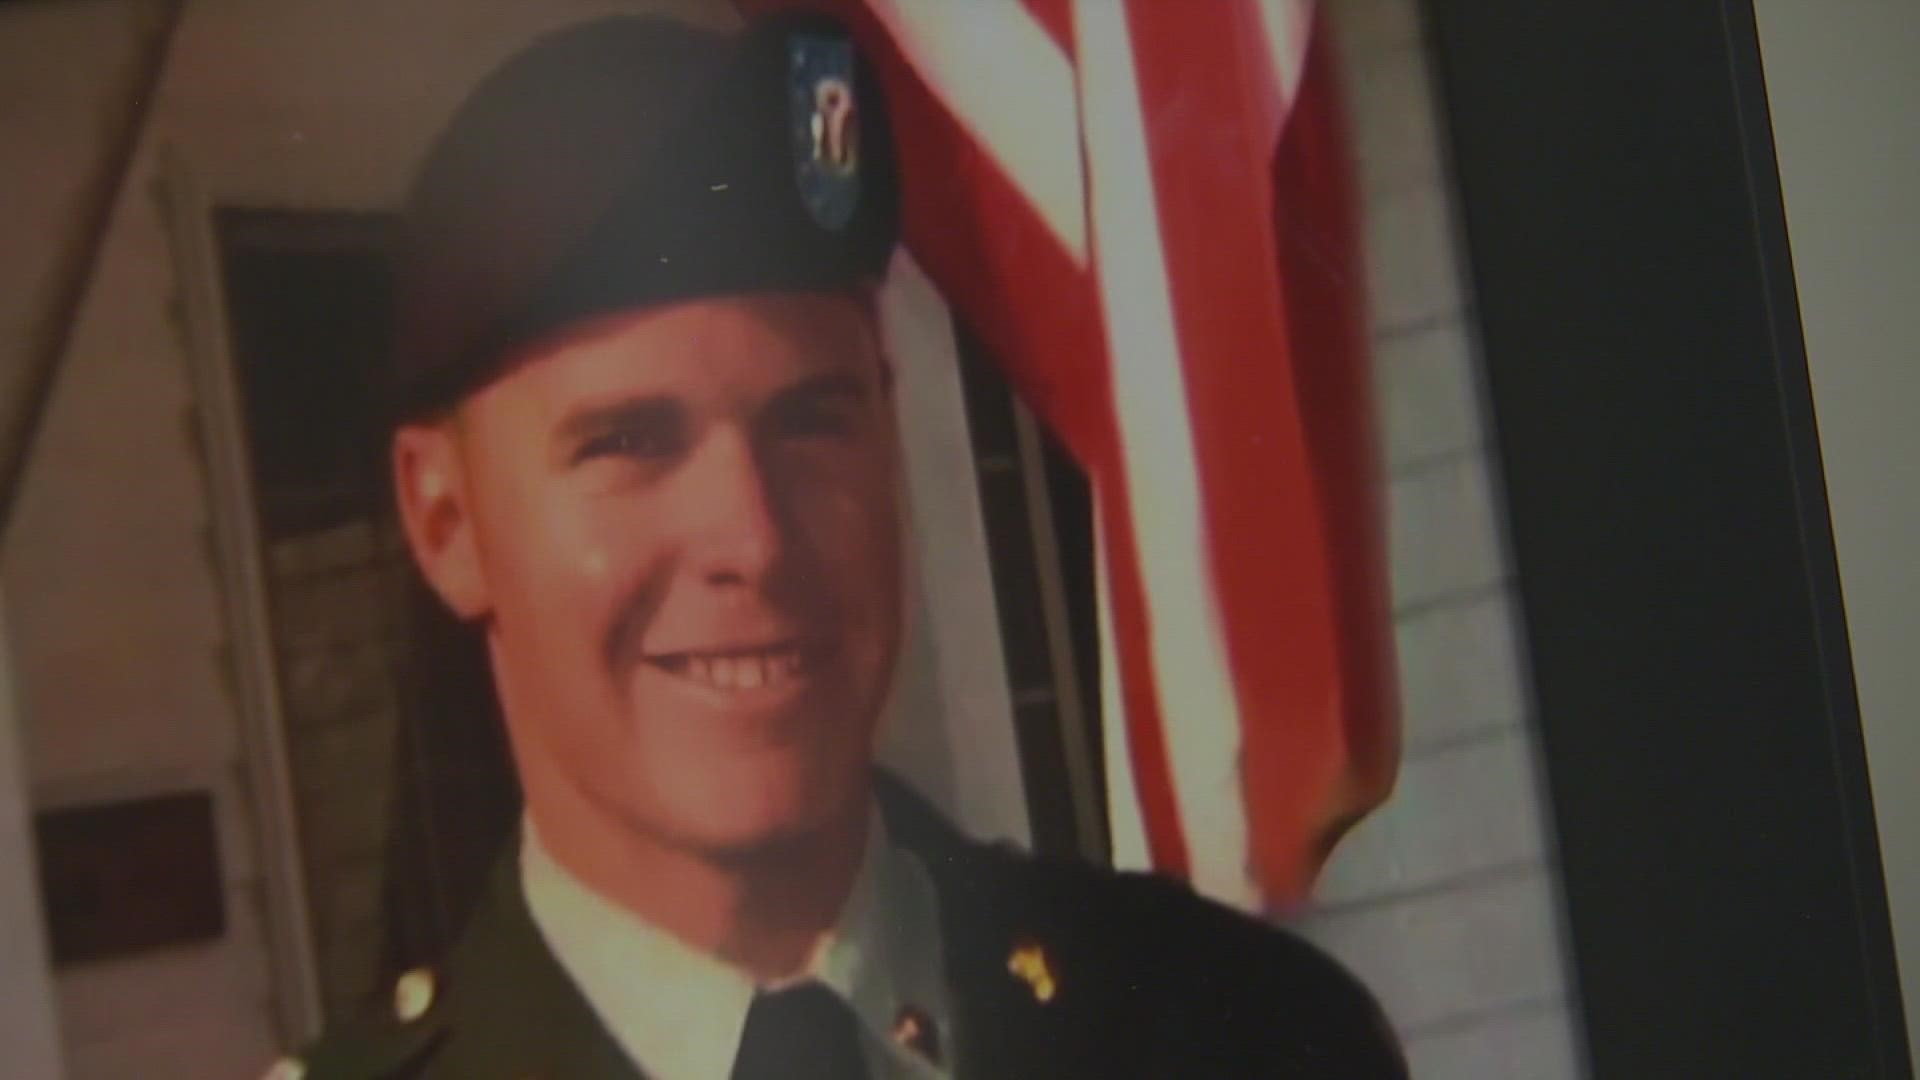 The JBLM’s United States Army Reserve Center will be renamed in honor of Sgt. James J. Holtom, who was killed in action while serving in Iraq in 2007.